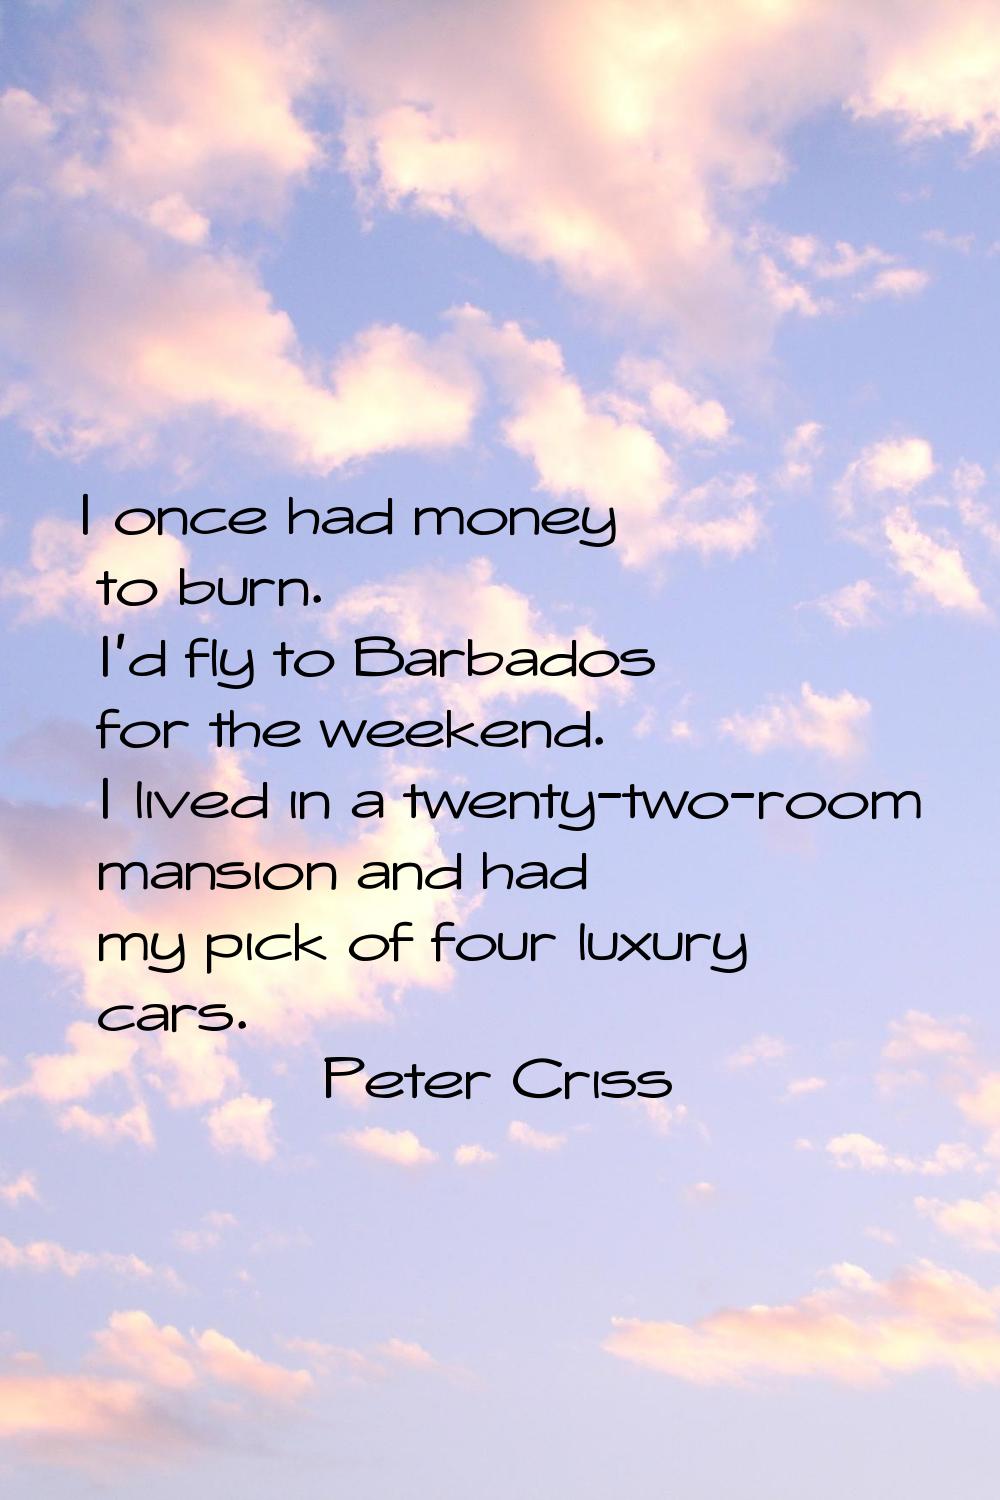 I once had money to burn. I'd fly to Barbados for the weekend. I lived in a twenty-two-room mansion